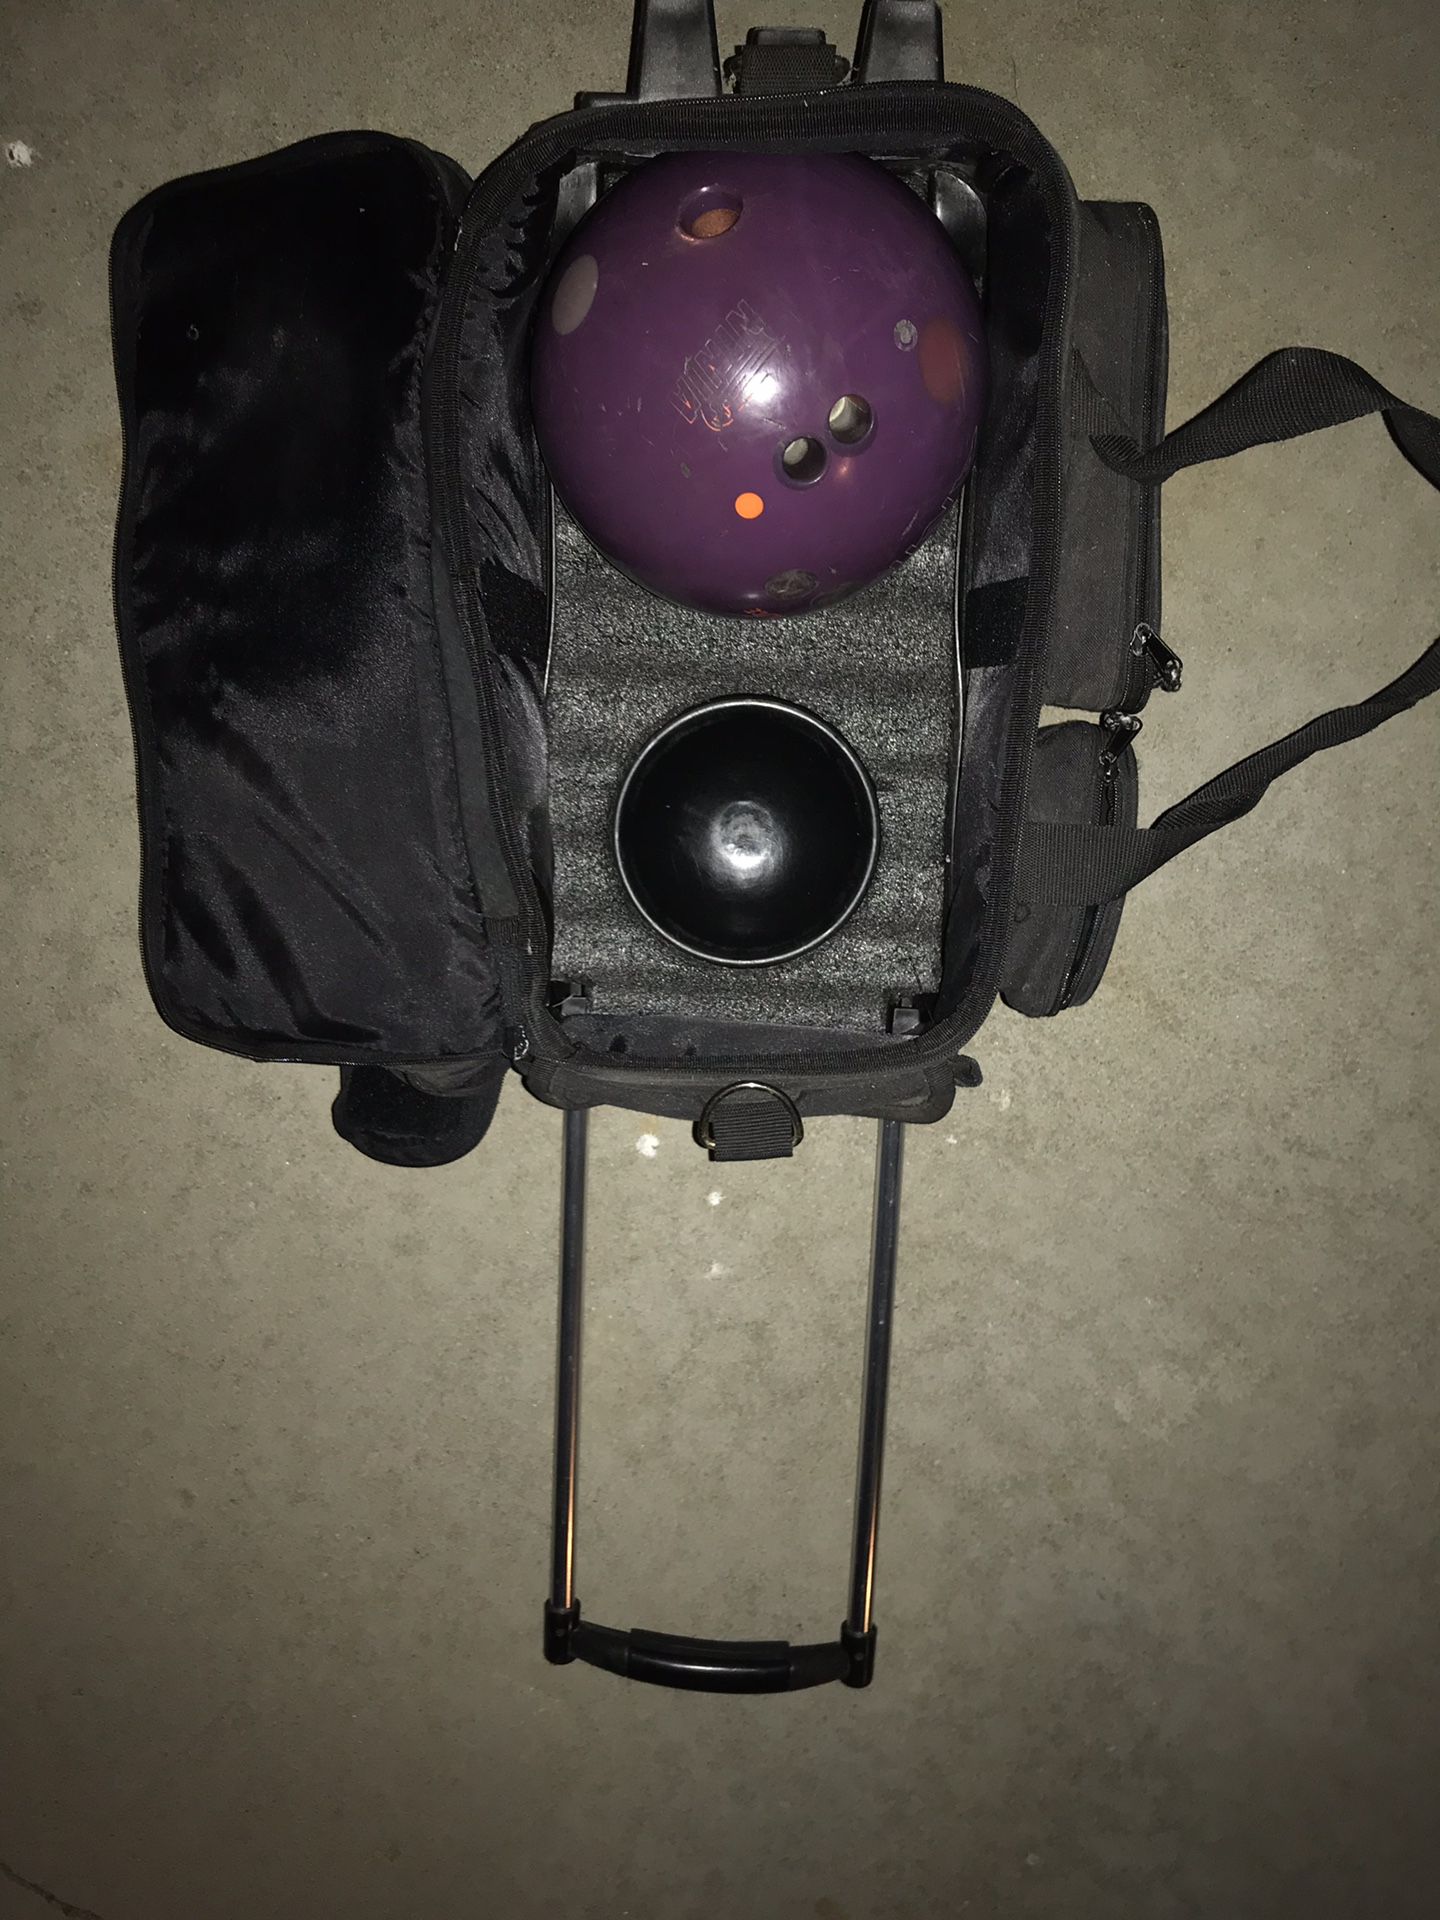 Bowling Bag, Ball, and Shoes